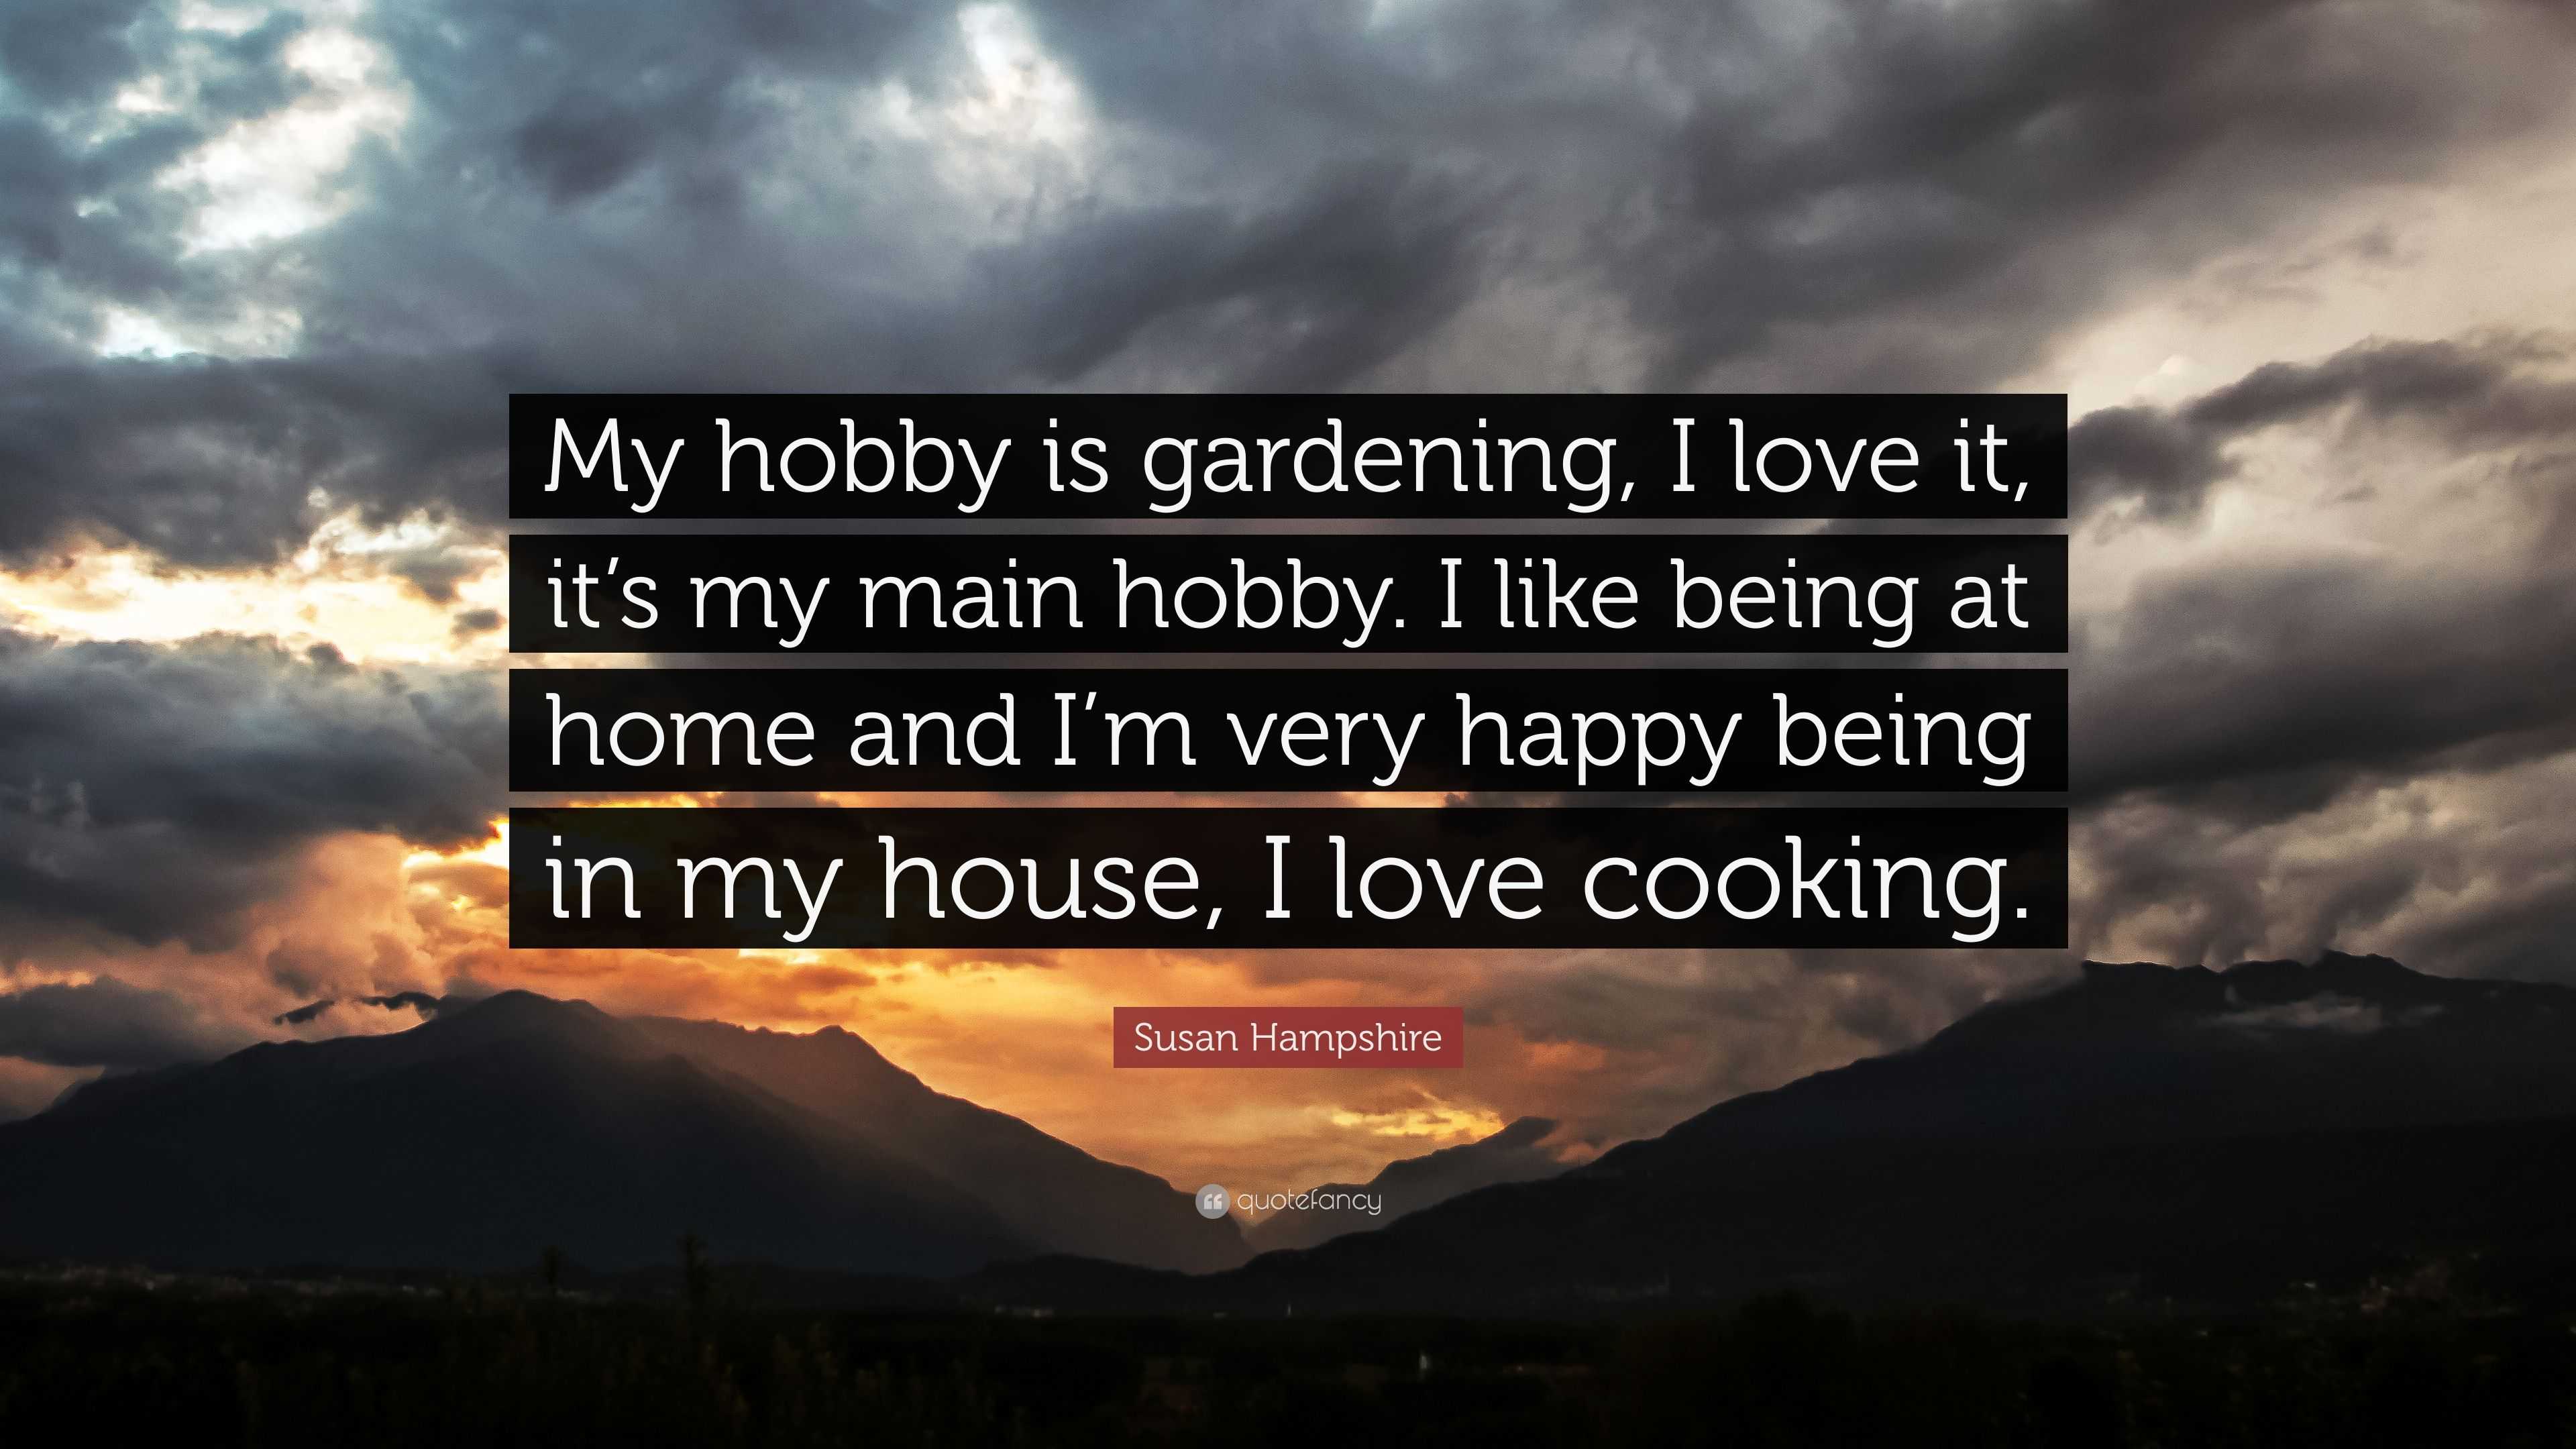 essay on my hobby gardening with quotes